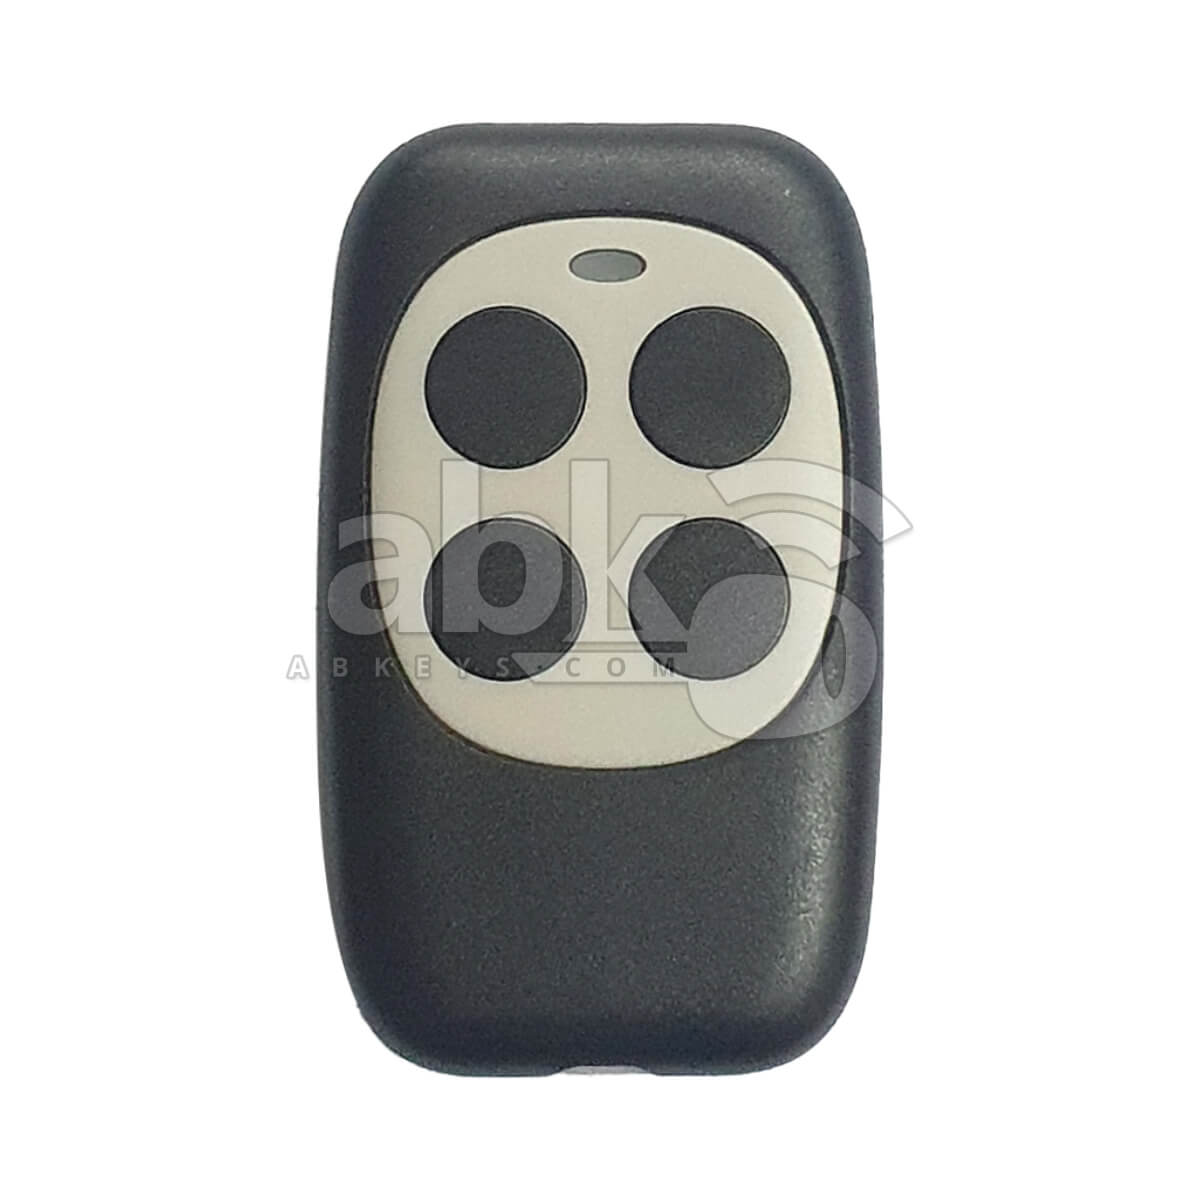 Universal Rolling Code & Fixed Code Remote With 4Buttons 433MHz Grey - ABK-634-GRAY - ABKEYS.COM